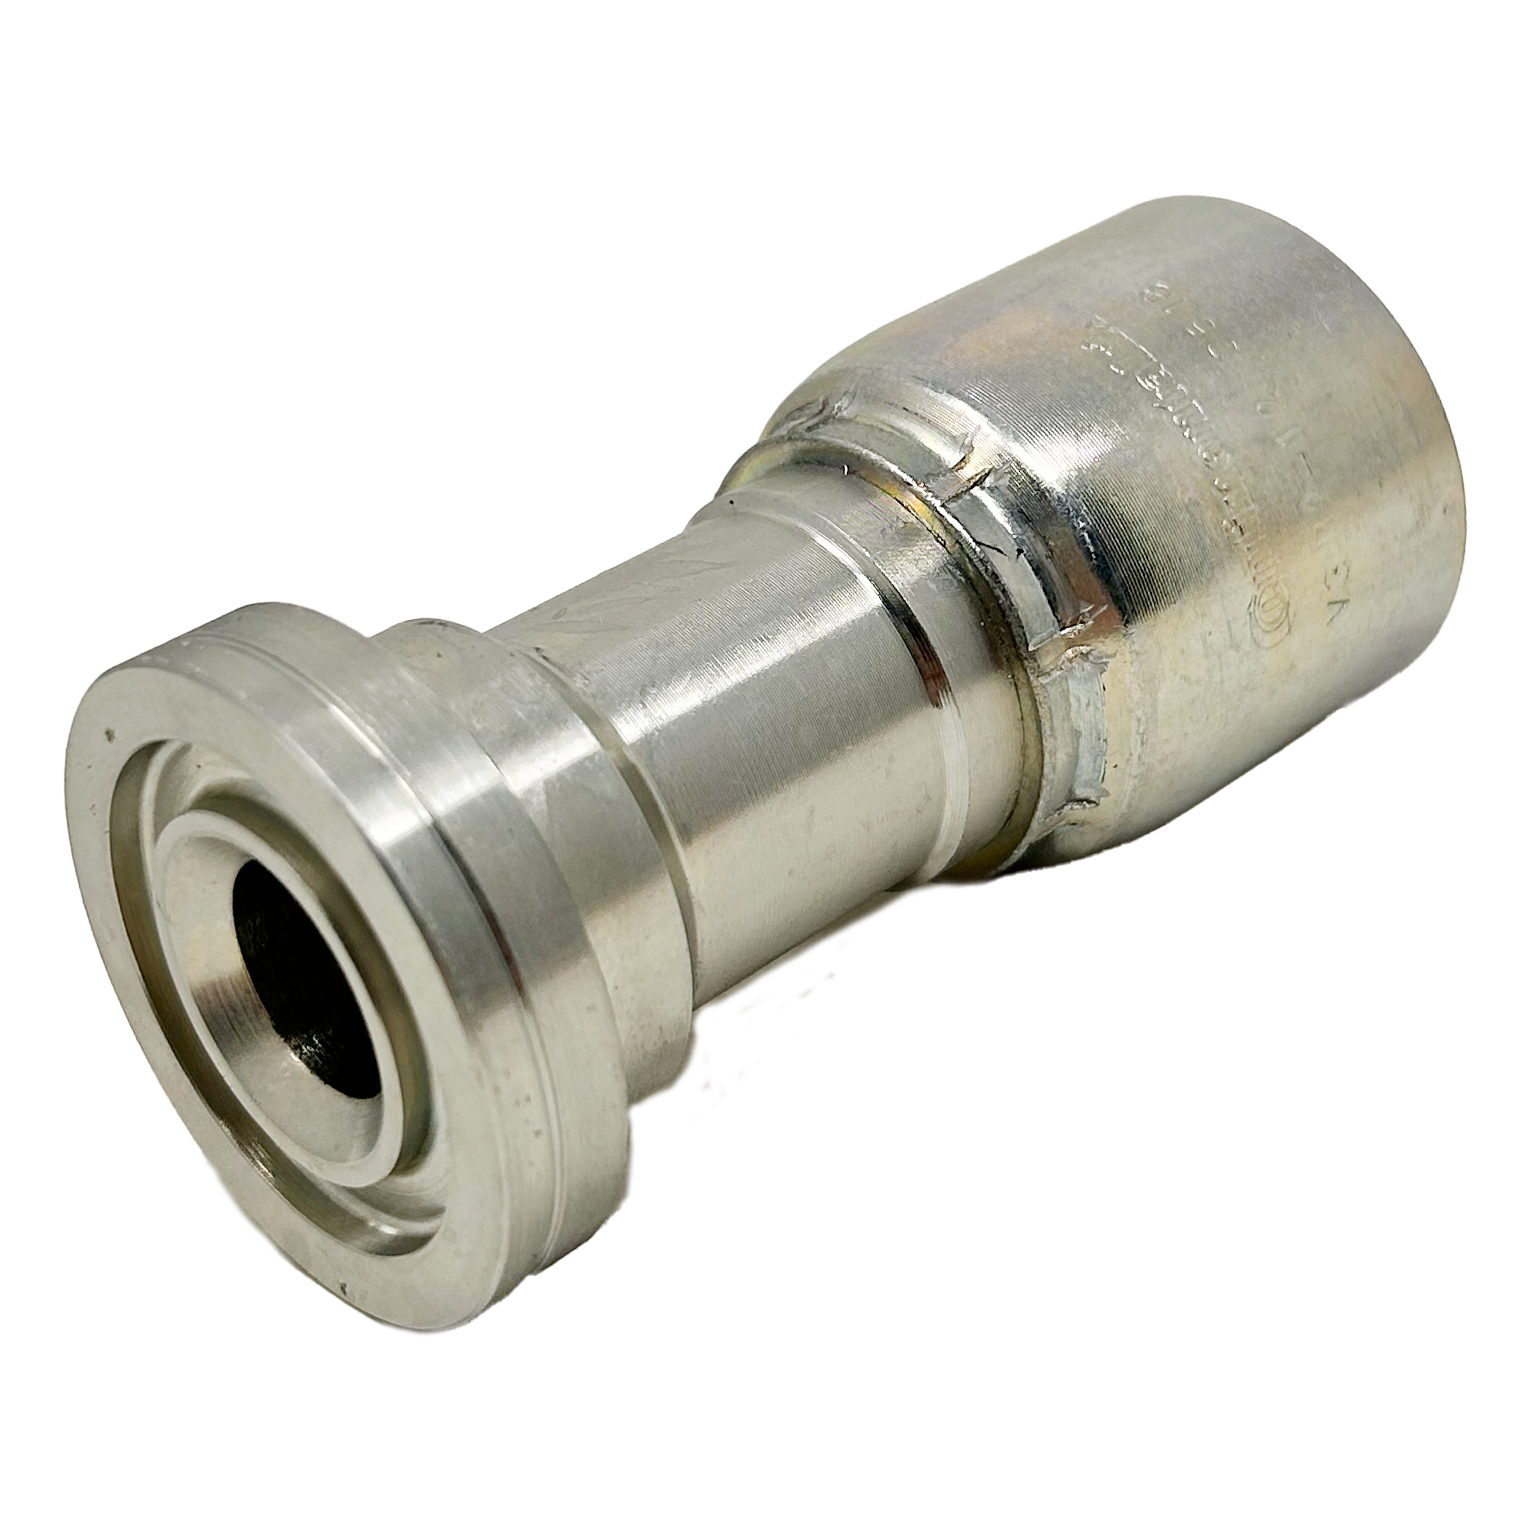 B2-FH-1212: Continental Hose Fitting, 0.75 (3/4") Hose ID x 0.75 (3/4") Code 62, Straight Connection